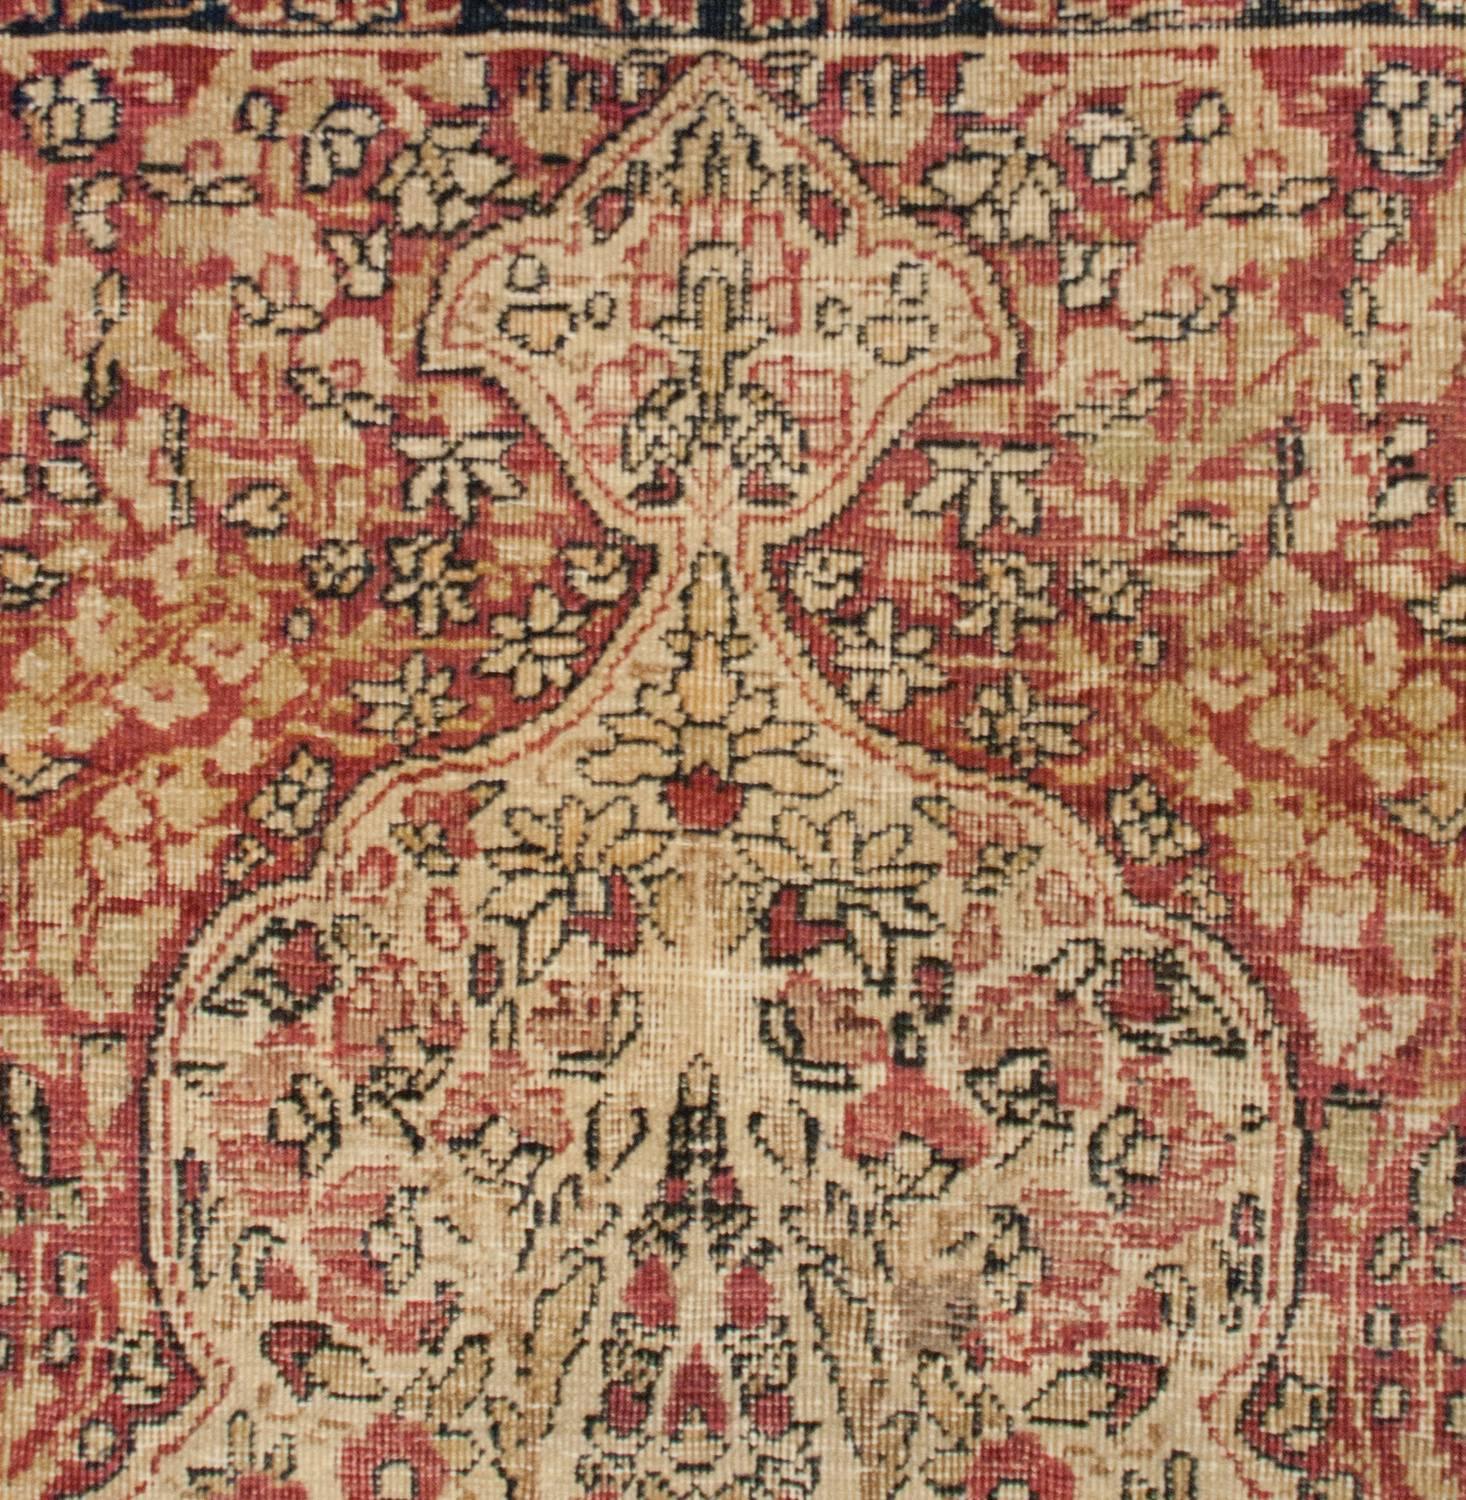 A wonderful late 19th century Persian Lavar Kirman prayer rug with a beautiful pattern of multiple flowering trees and branches woven in traditional cranberry, pink, cream and black wool. The border is comprised of three distinct floral and